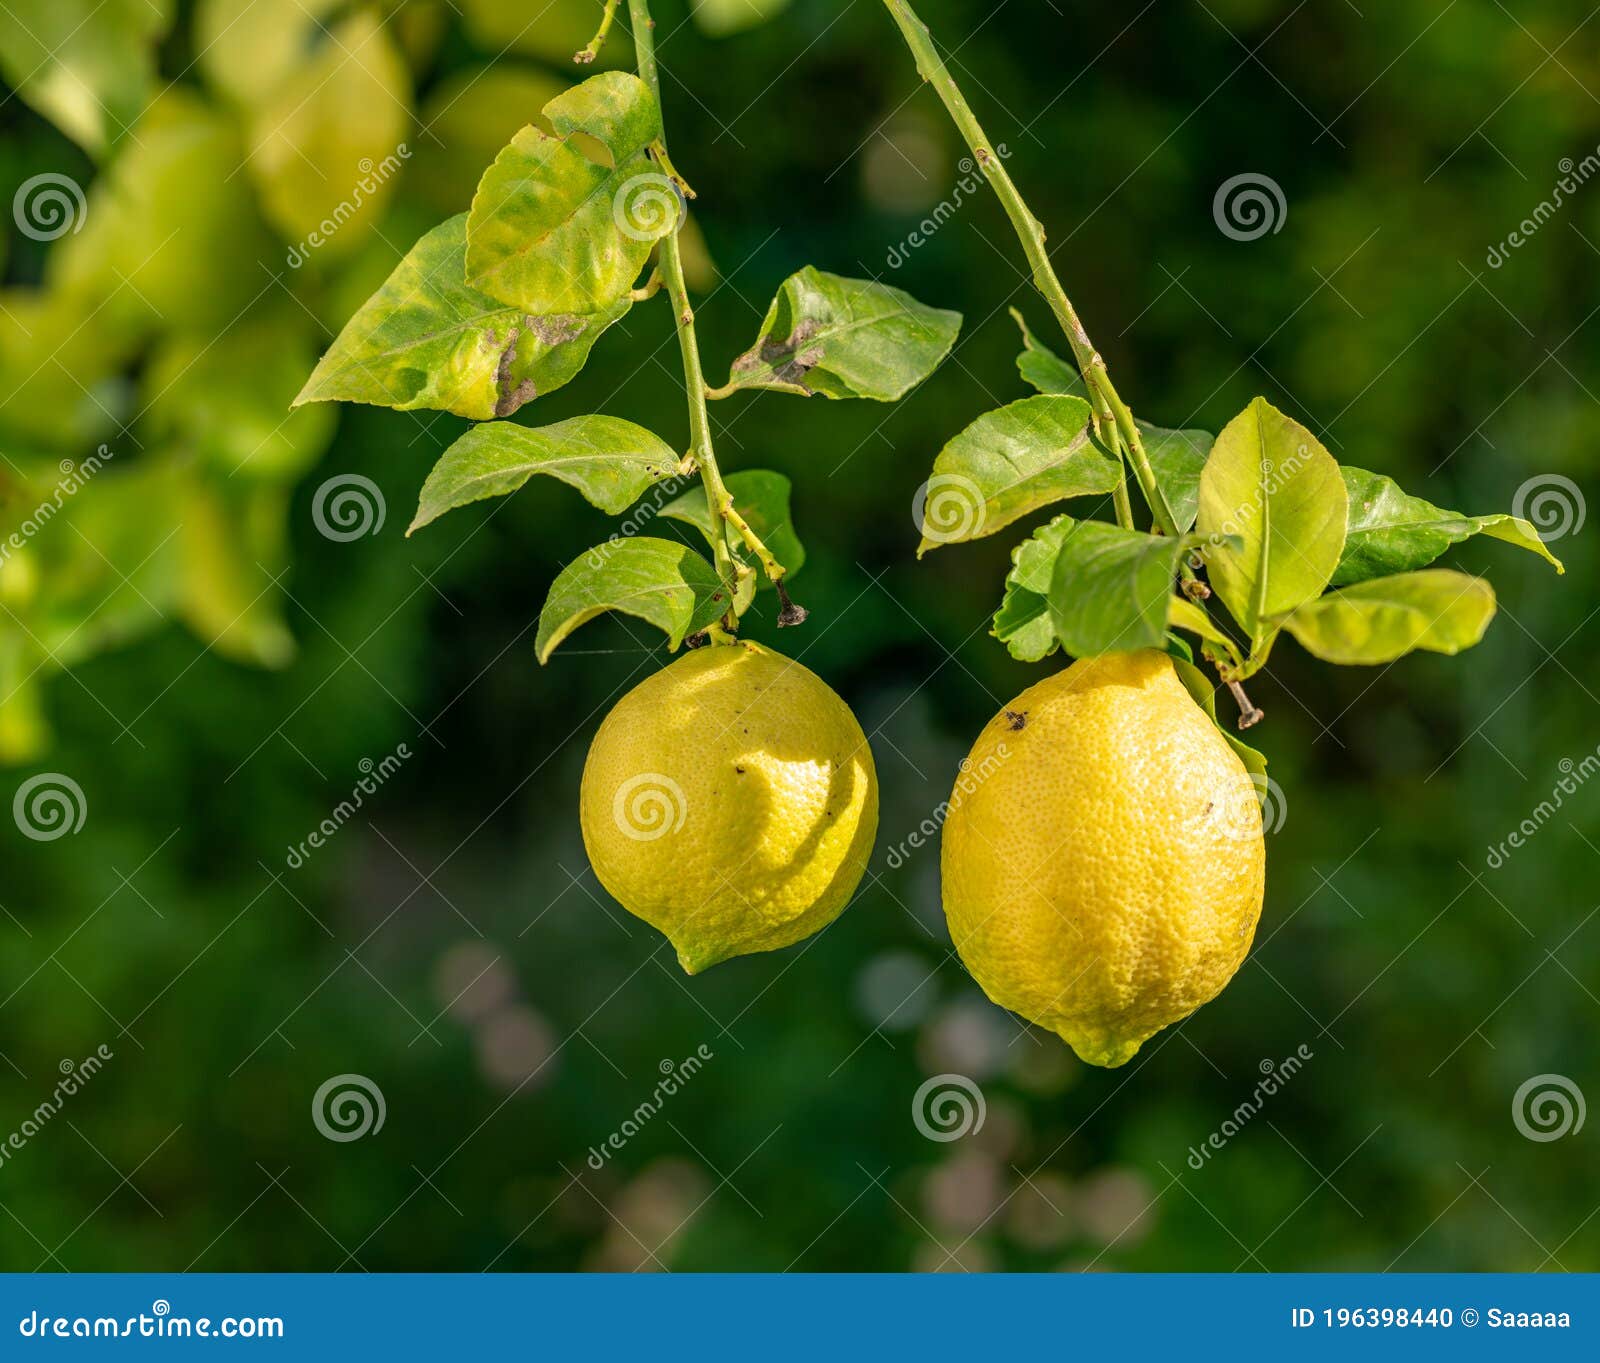 two imperfect lemons with flaws on the tree